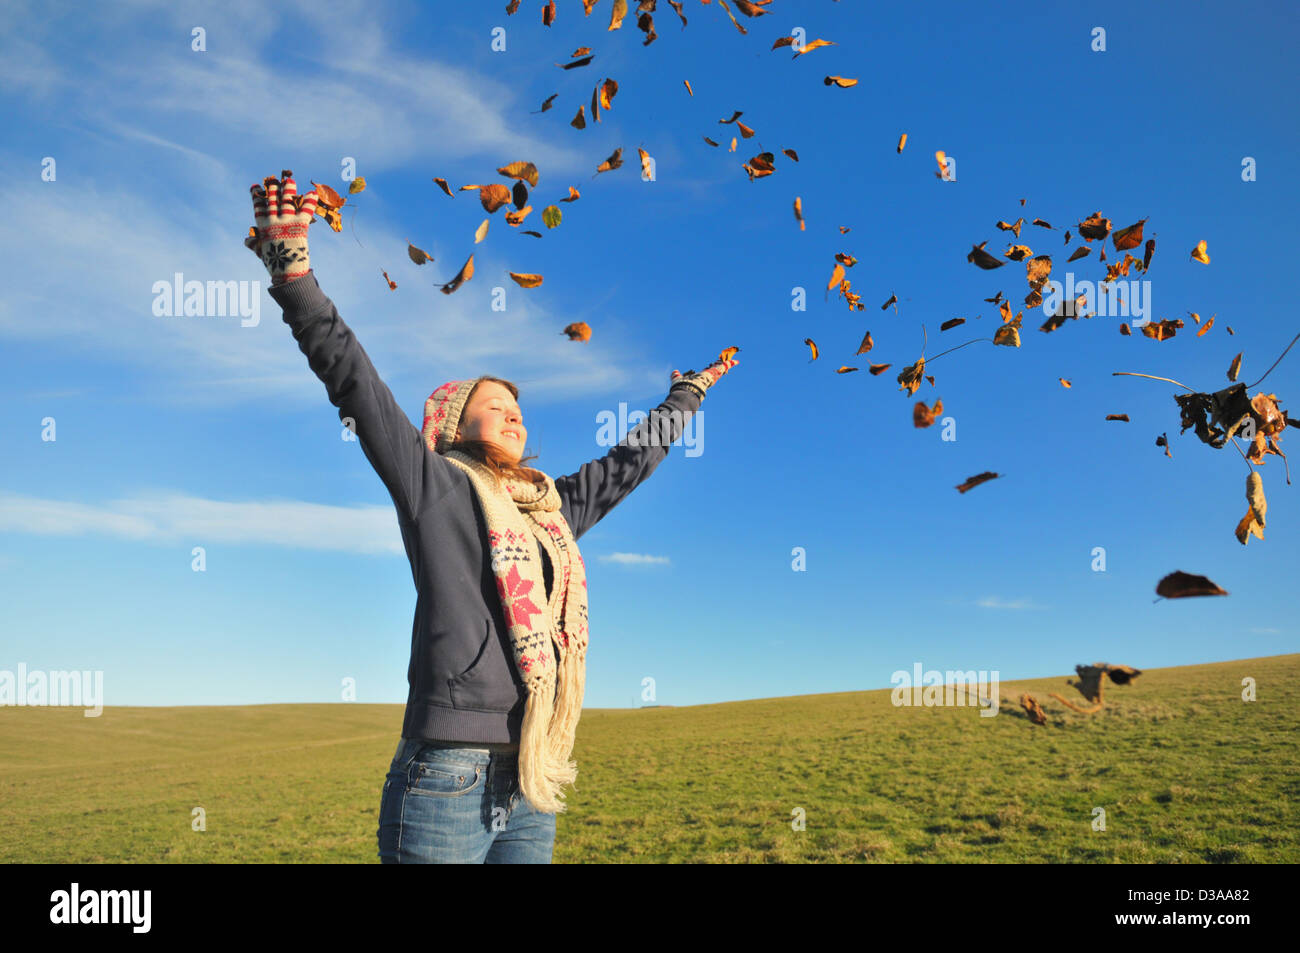 Woman playing in autumn leaves Stock Photo